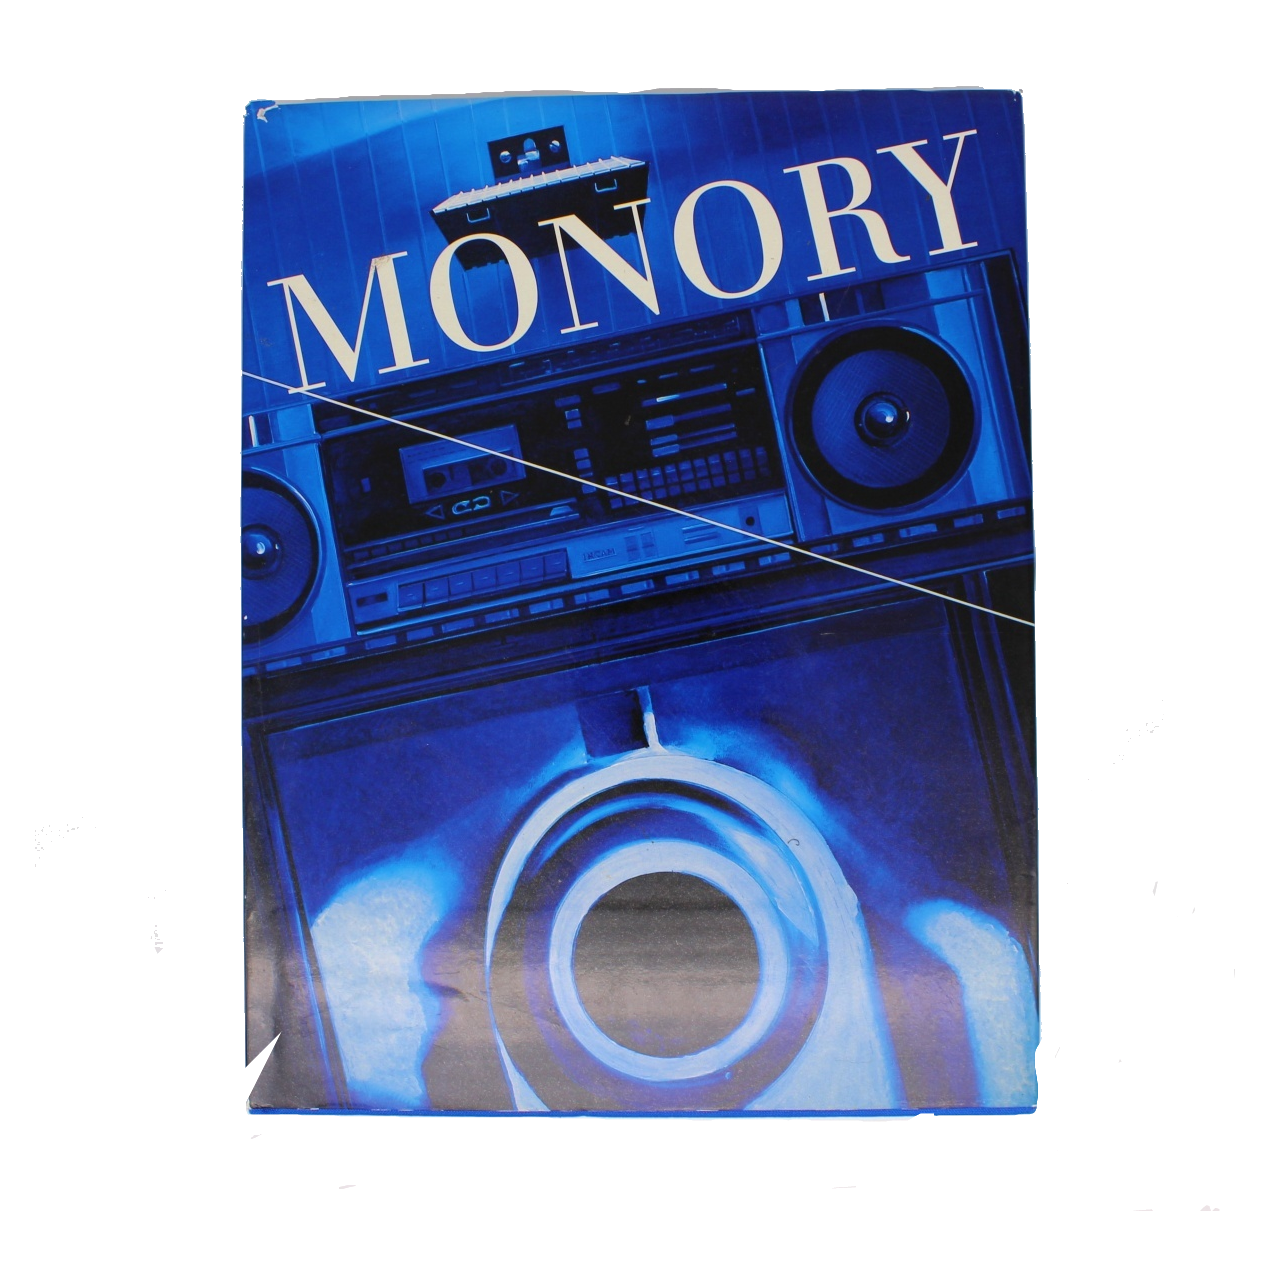 Monory - Coffee Table Book (VINTAGE)